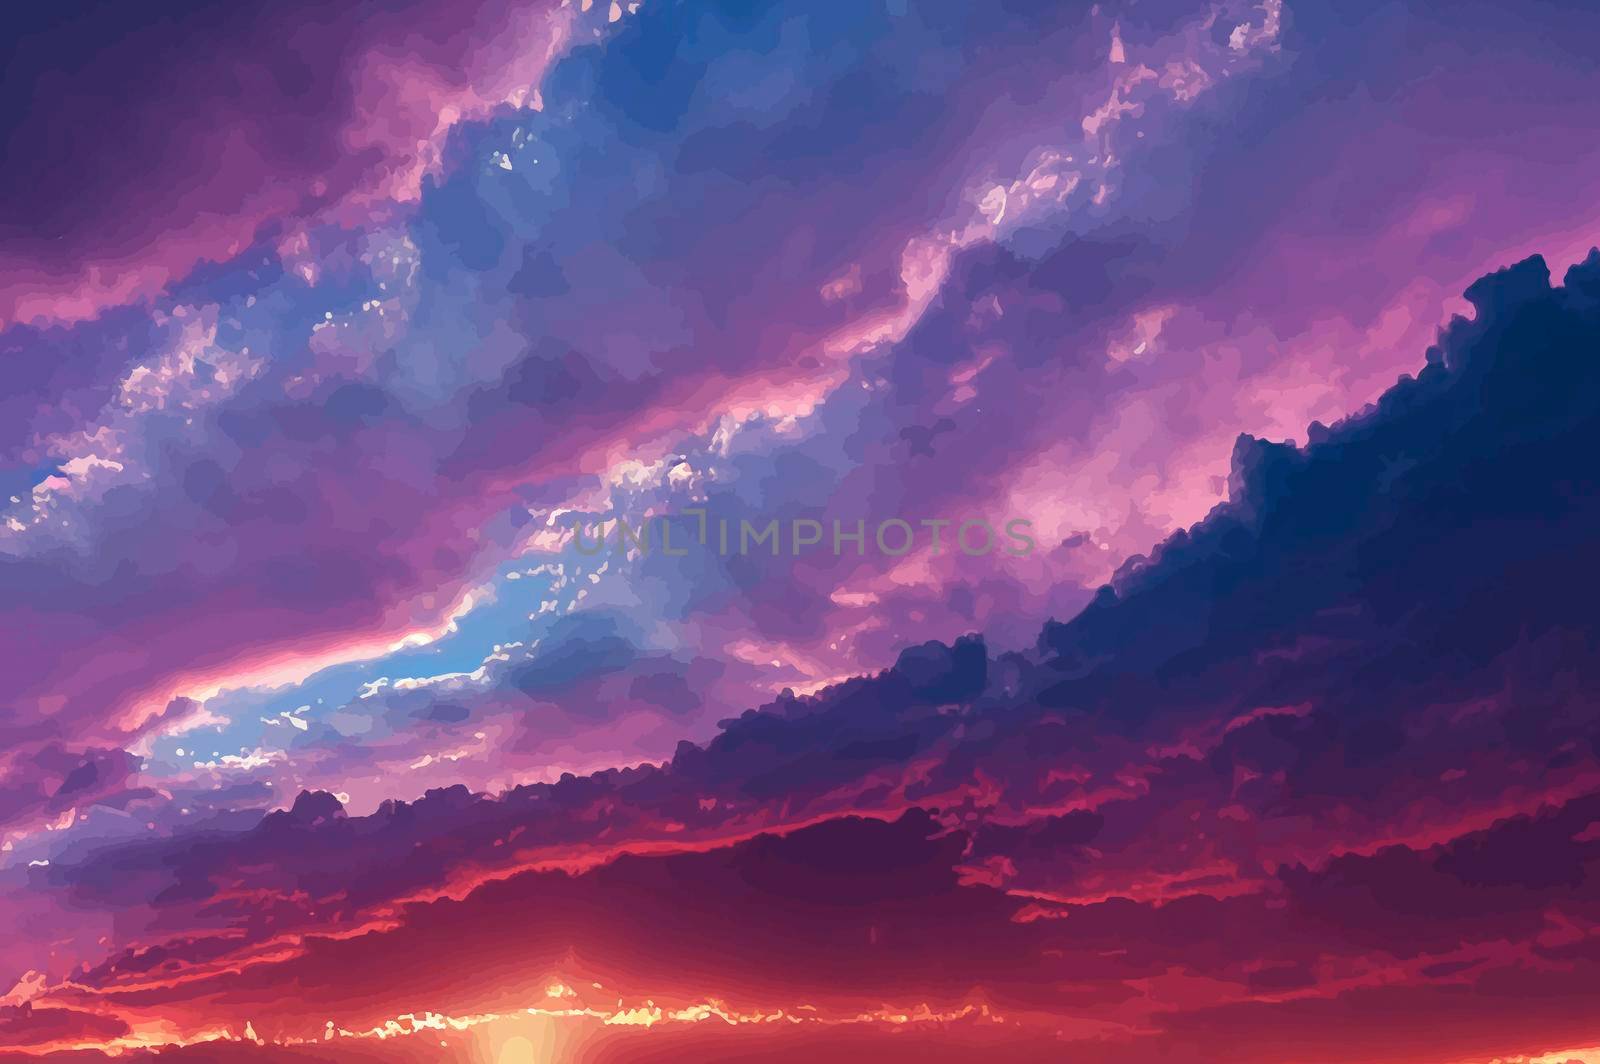 illustration of the Beautiful pastel pink and purple skies and clouds at night as the sun sets. Beautiful sky and clouds by JpRamos